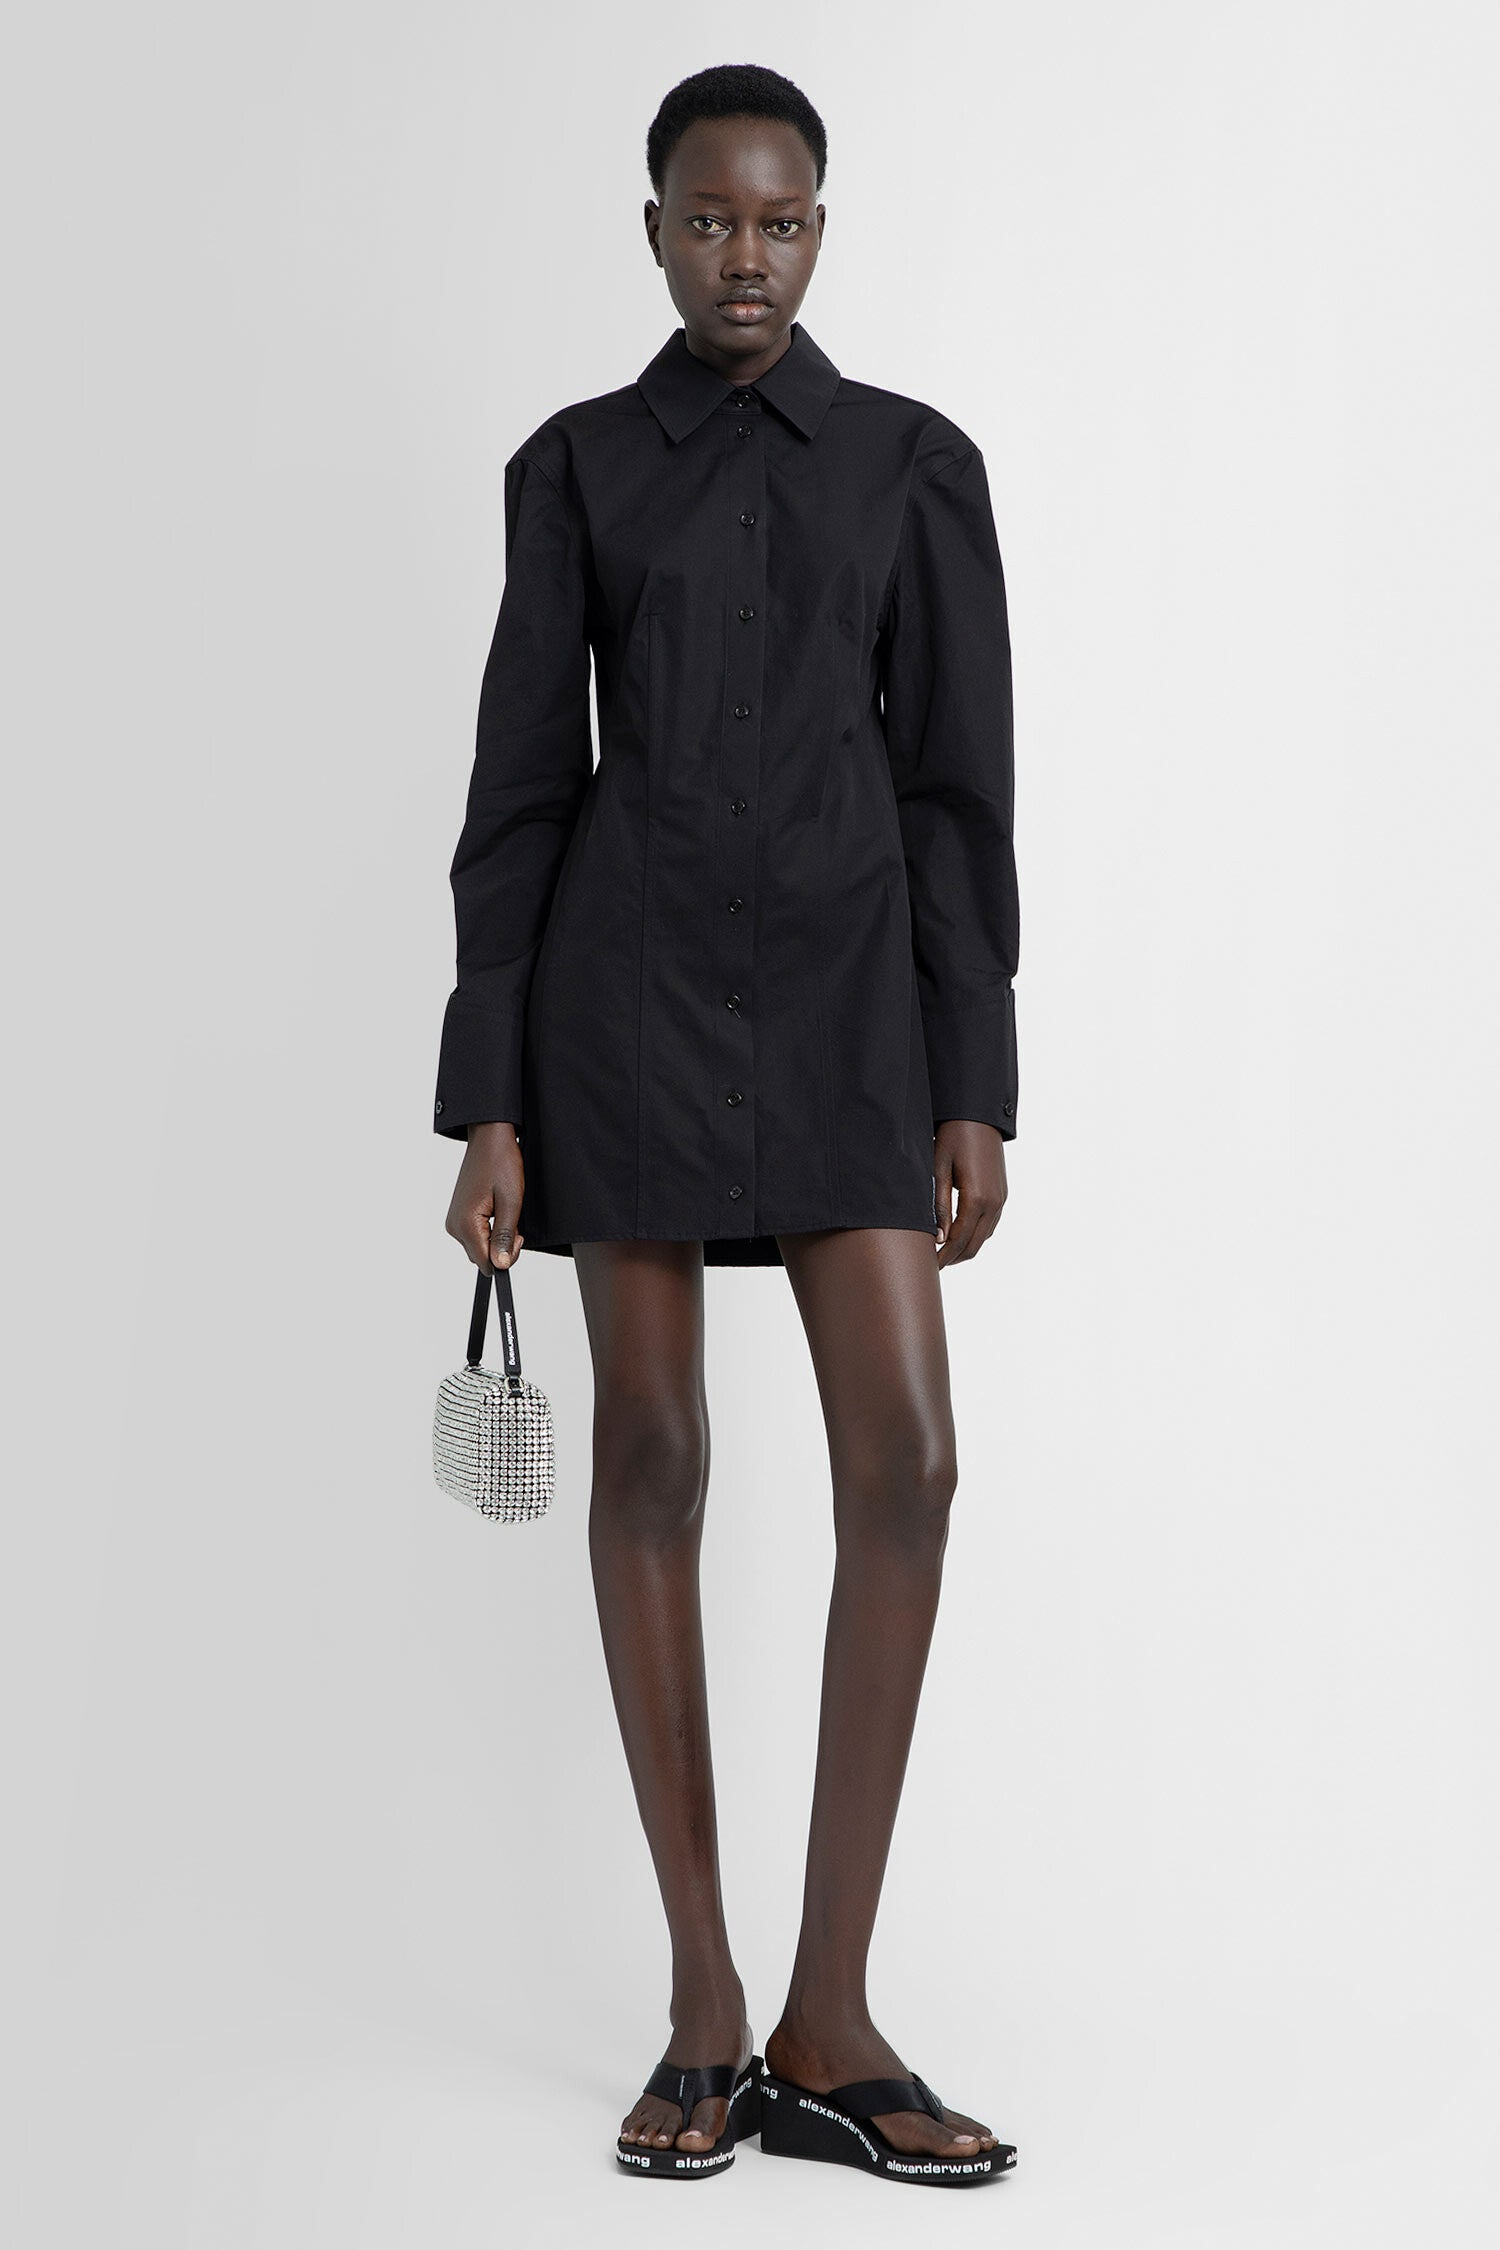 ALEXANDER WANG  Black tights, Classic black, Outfit accessories